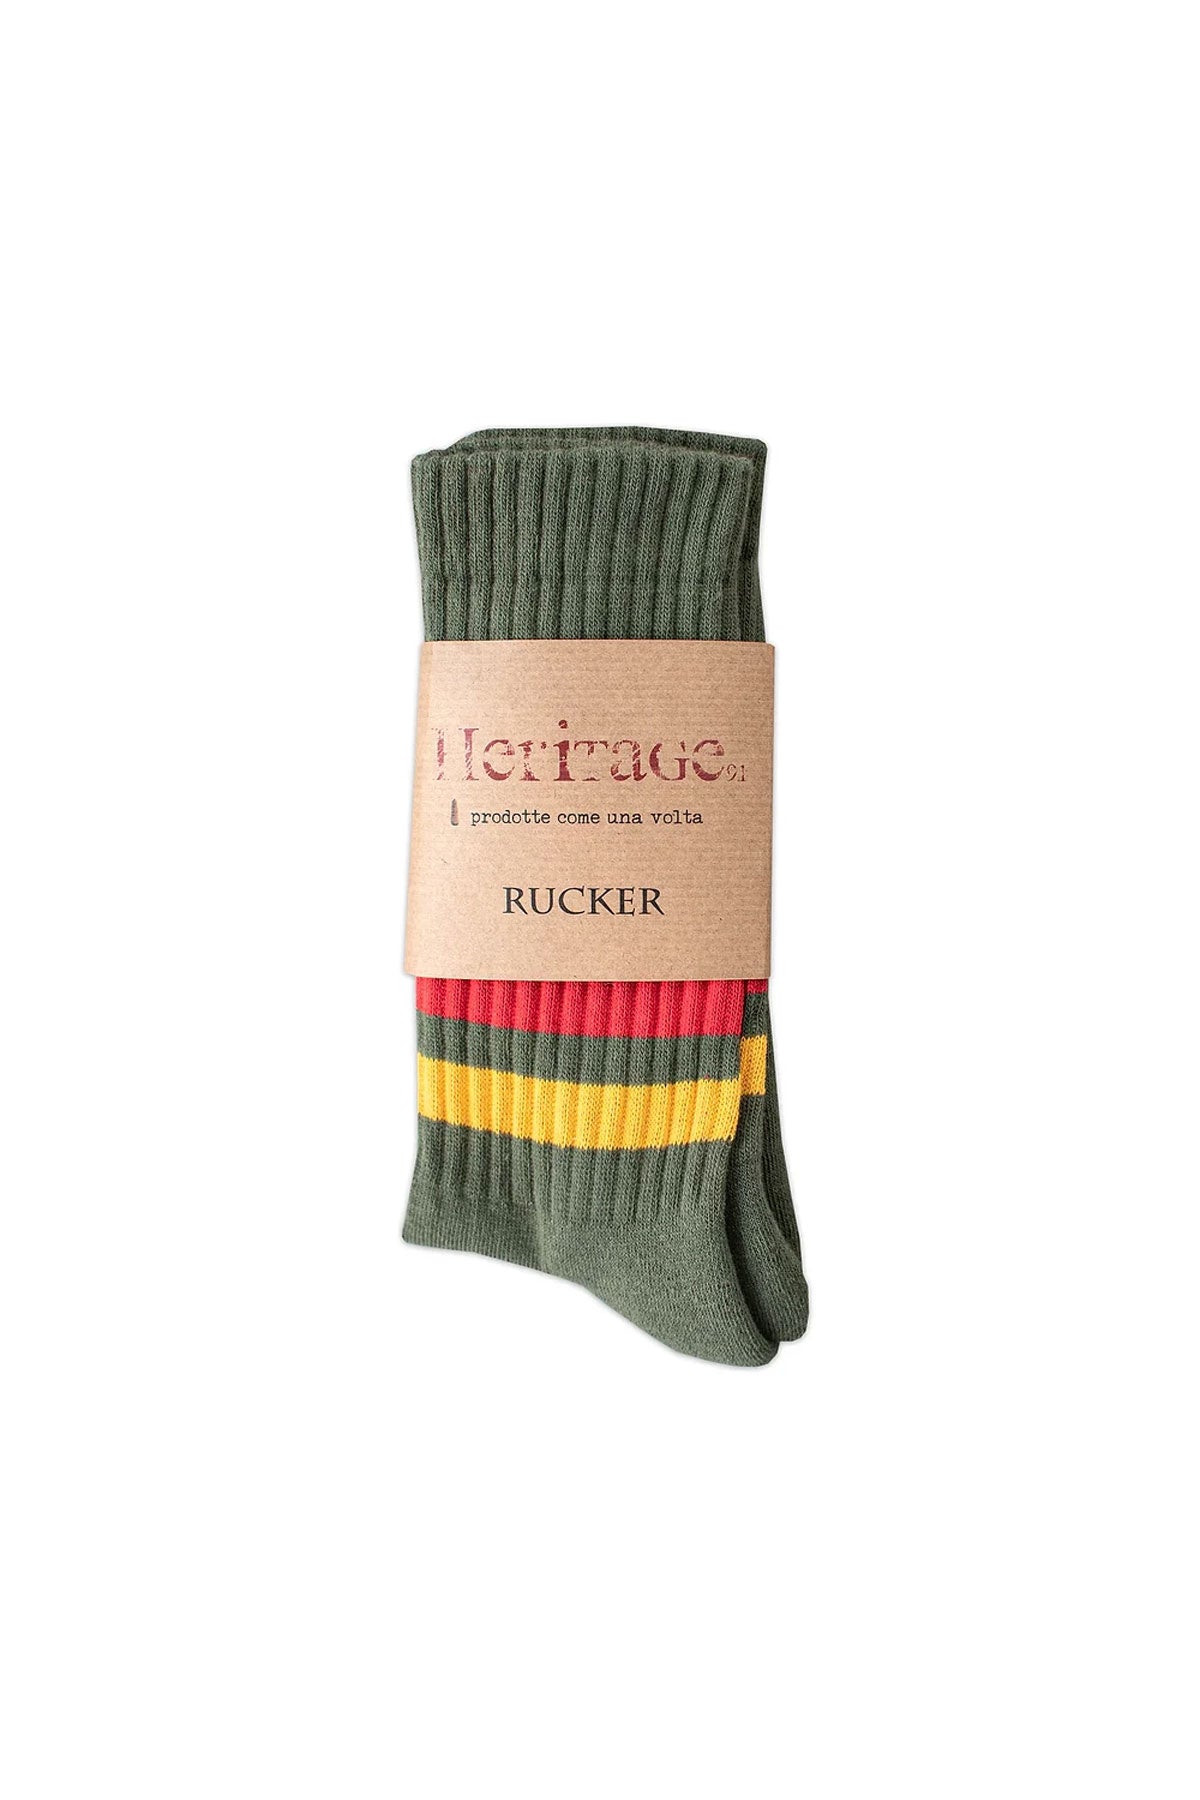 Heritage9.1 - Rucker - Military Green w/ Red & Yellow Stripes